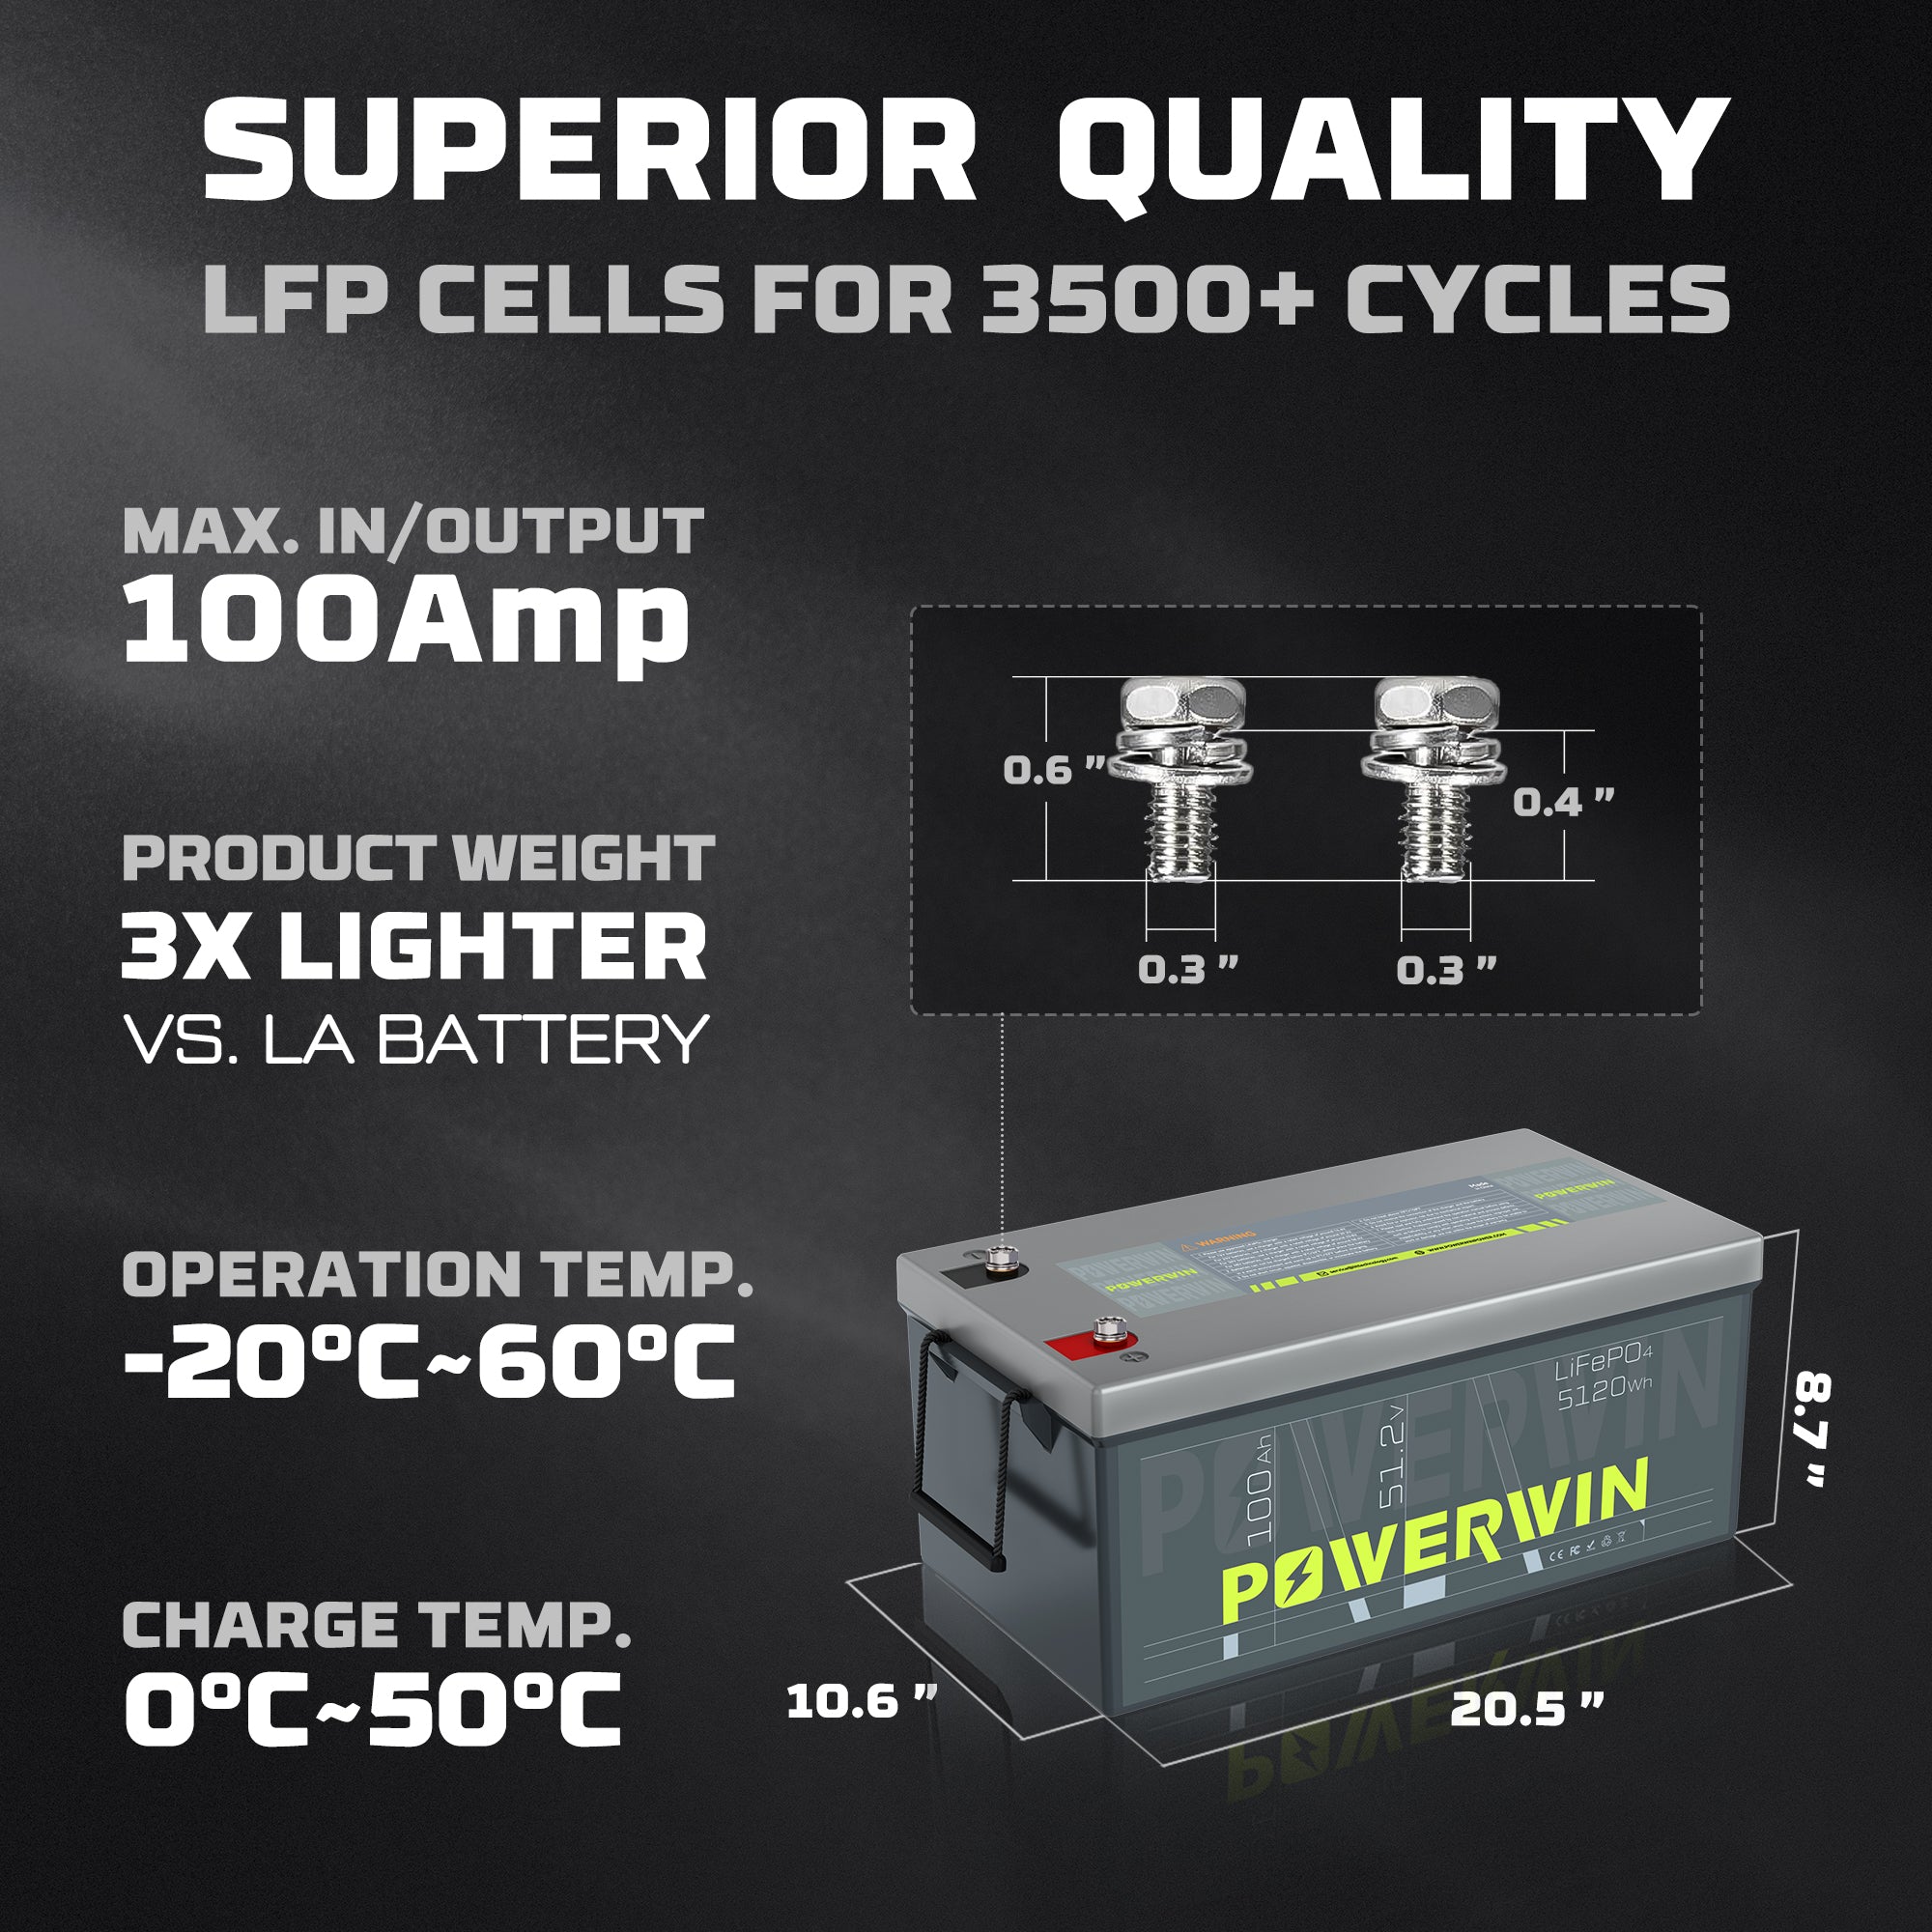 POWERWIN BT5120 48V 100Ah 5120Wh Lithium Battery 3 Pack 15360Wh